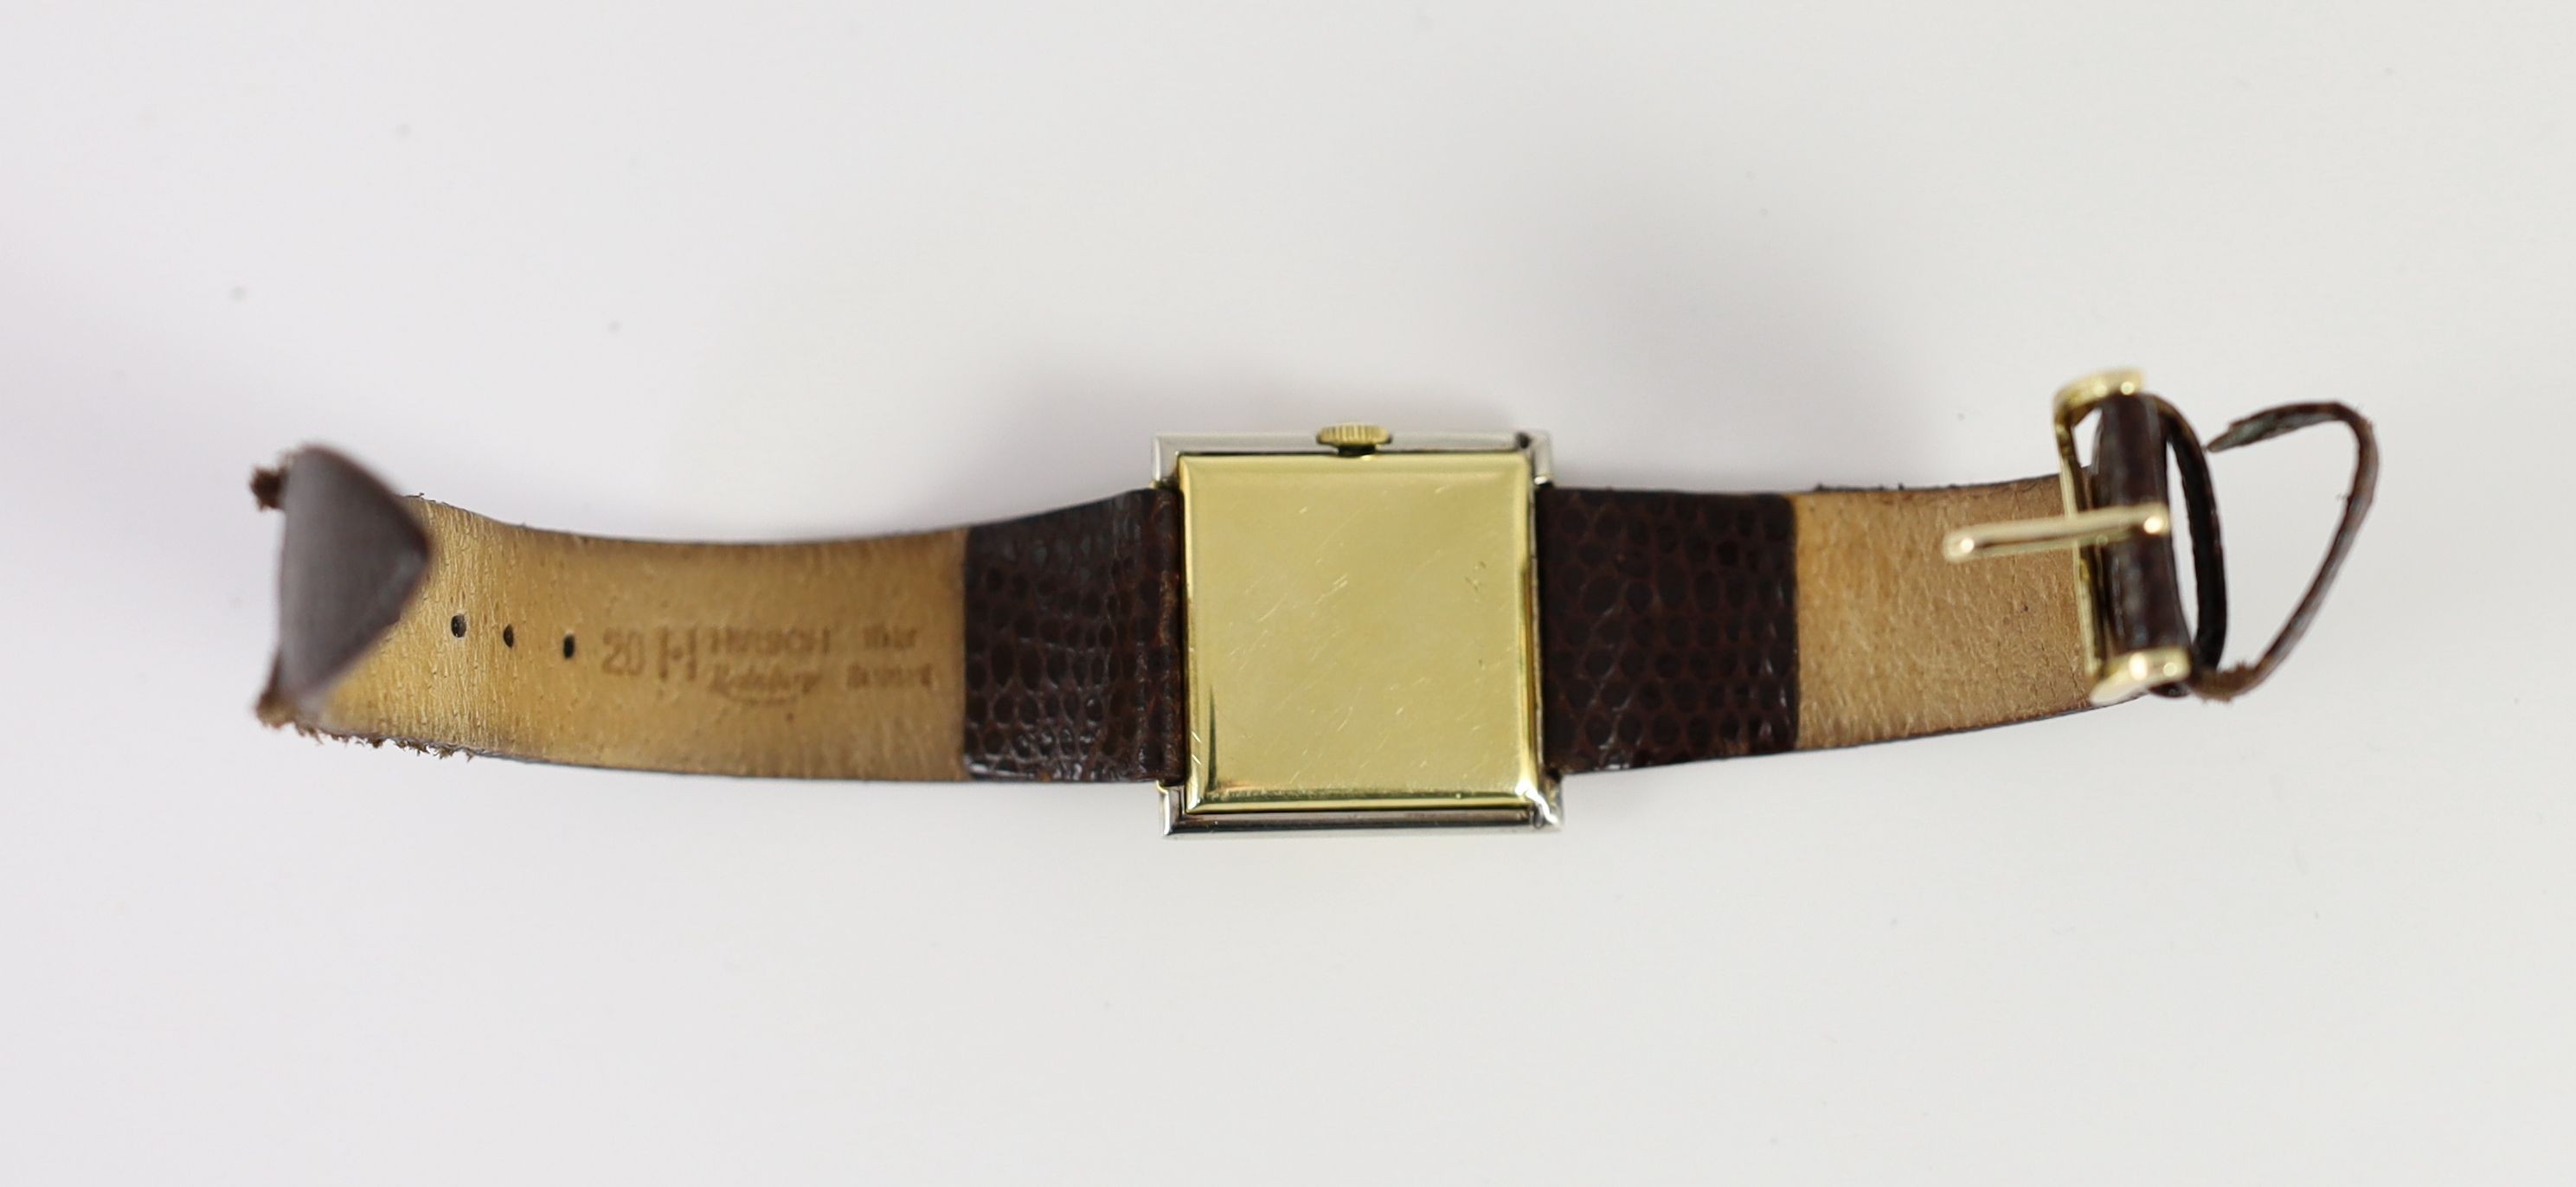 An Art Deco 18ct gold and platinum Longines manual wind square dial wrist watch